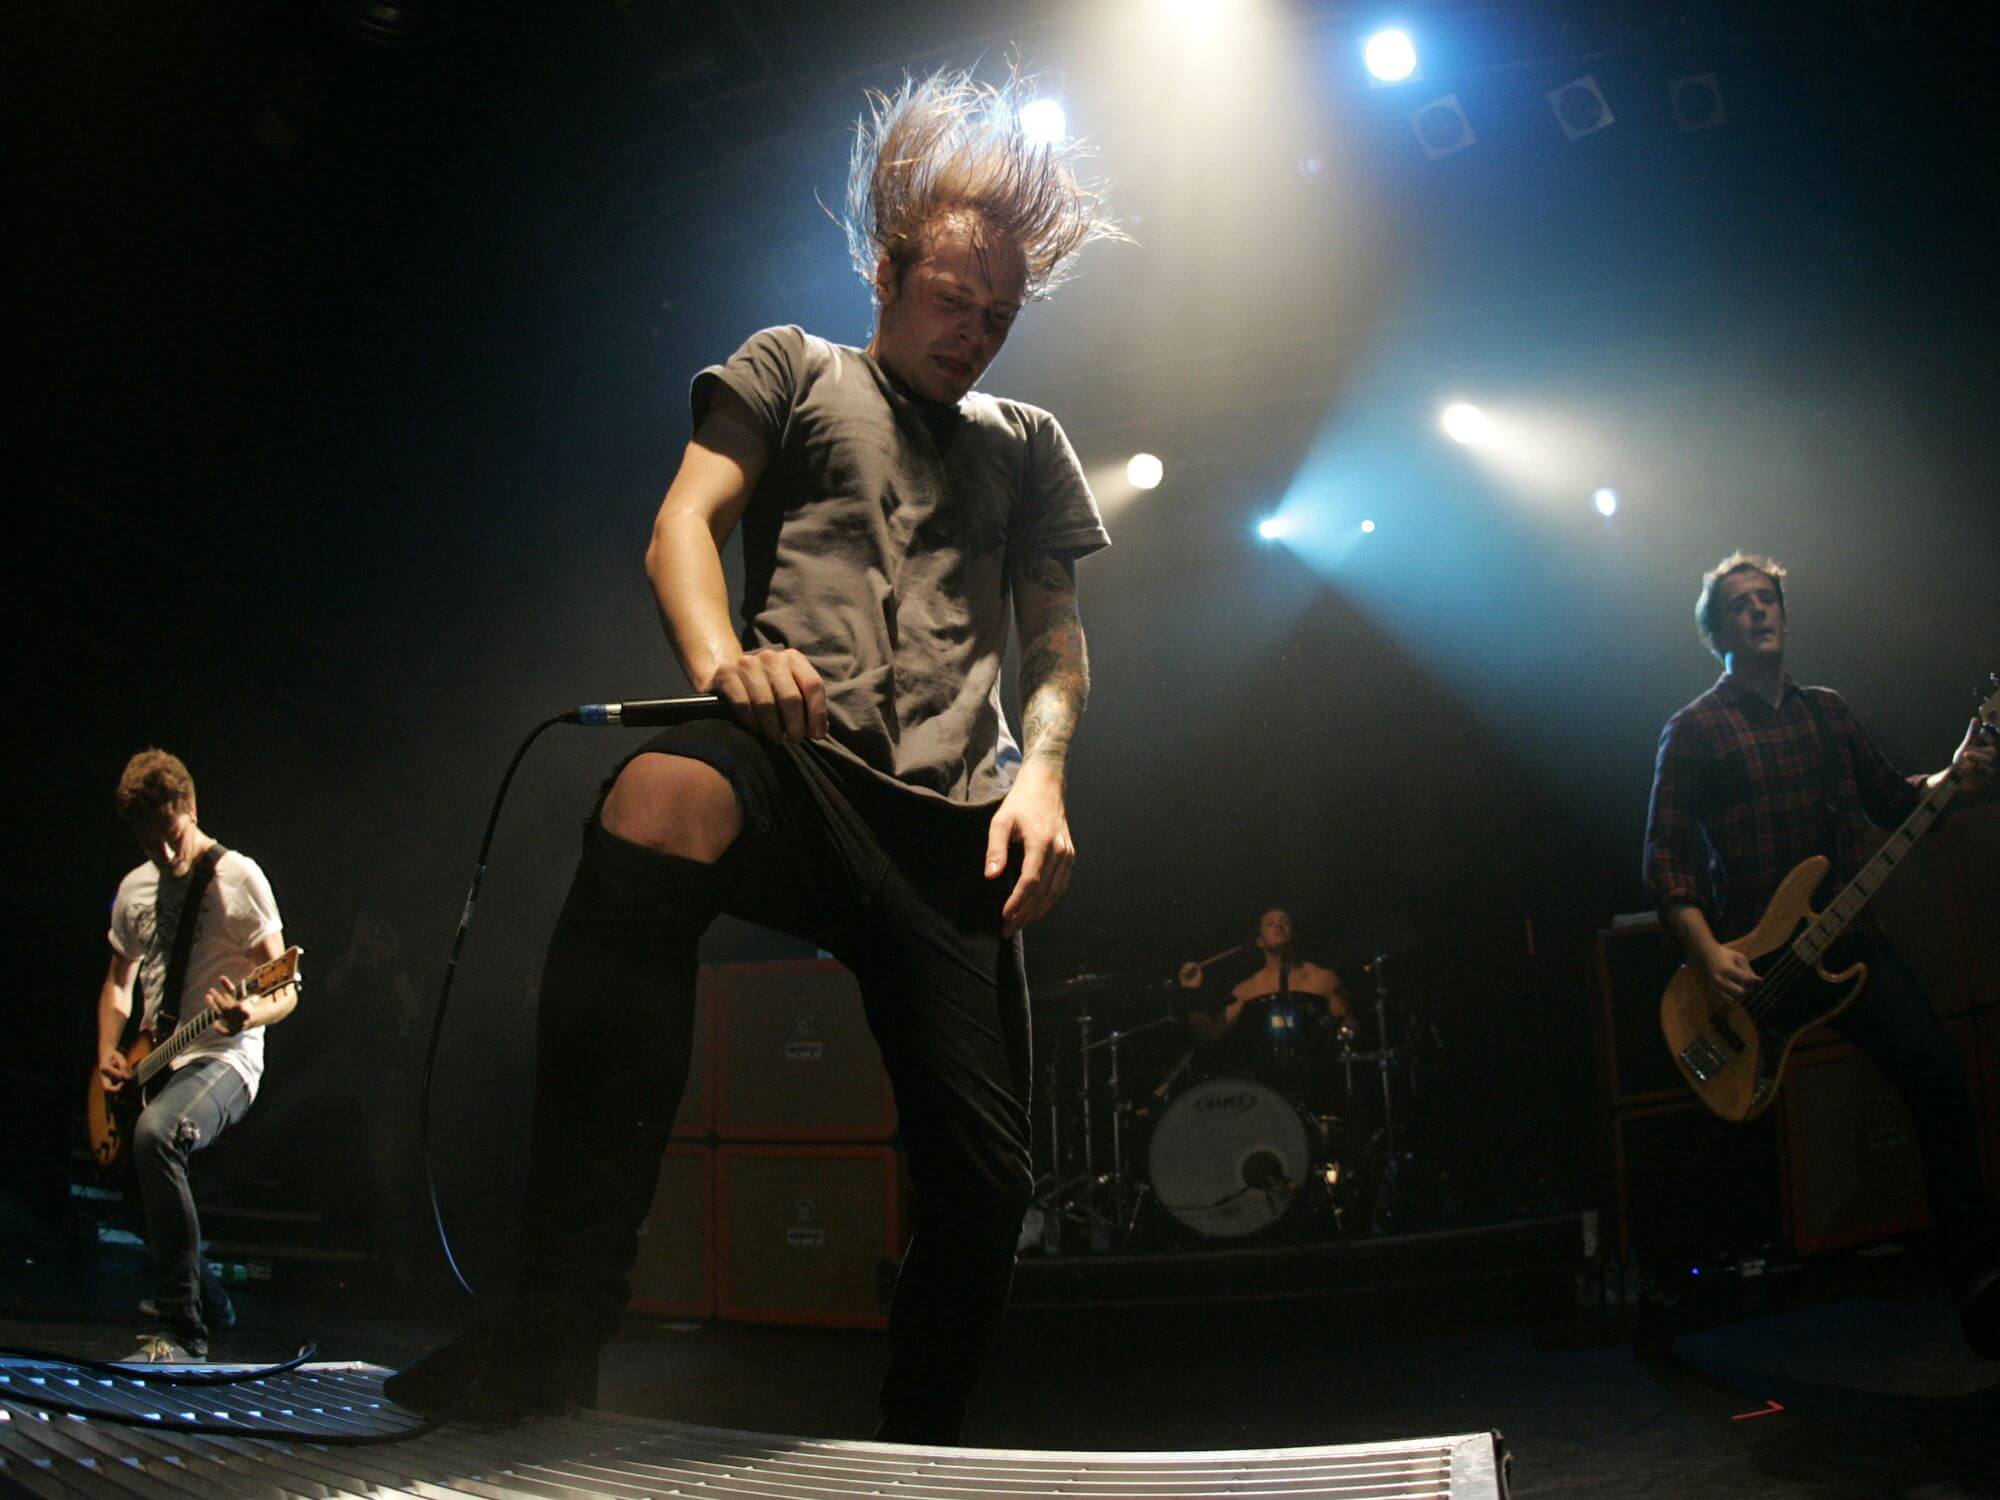 Architects performing live in 2010